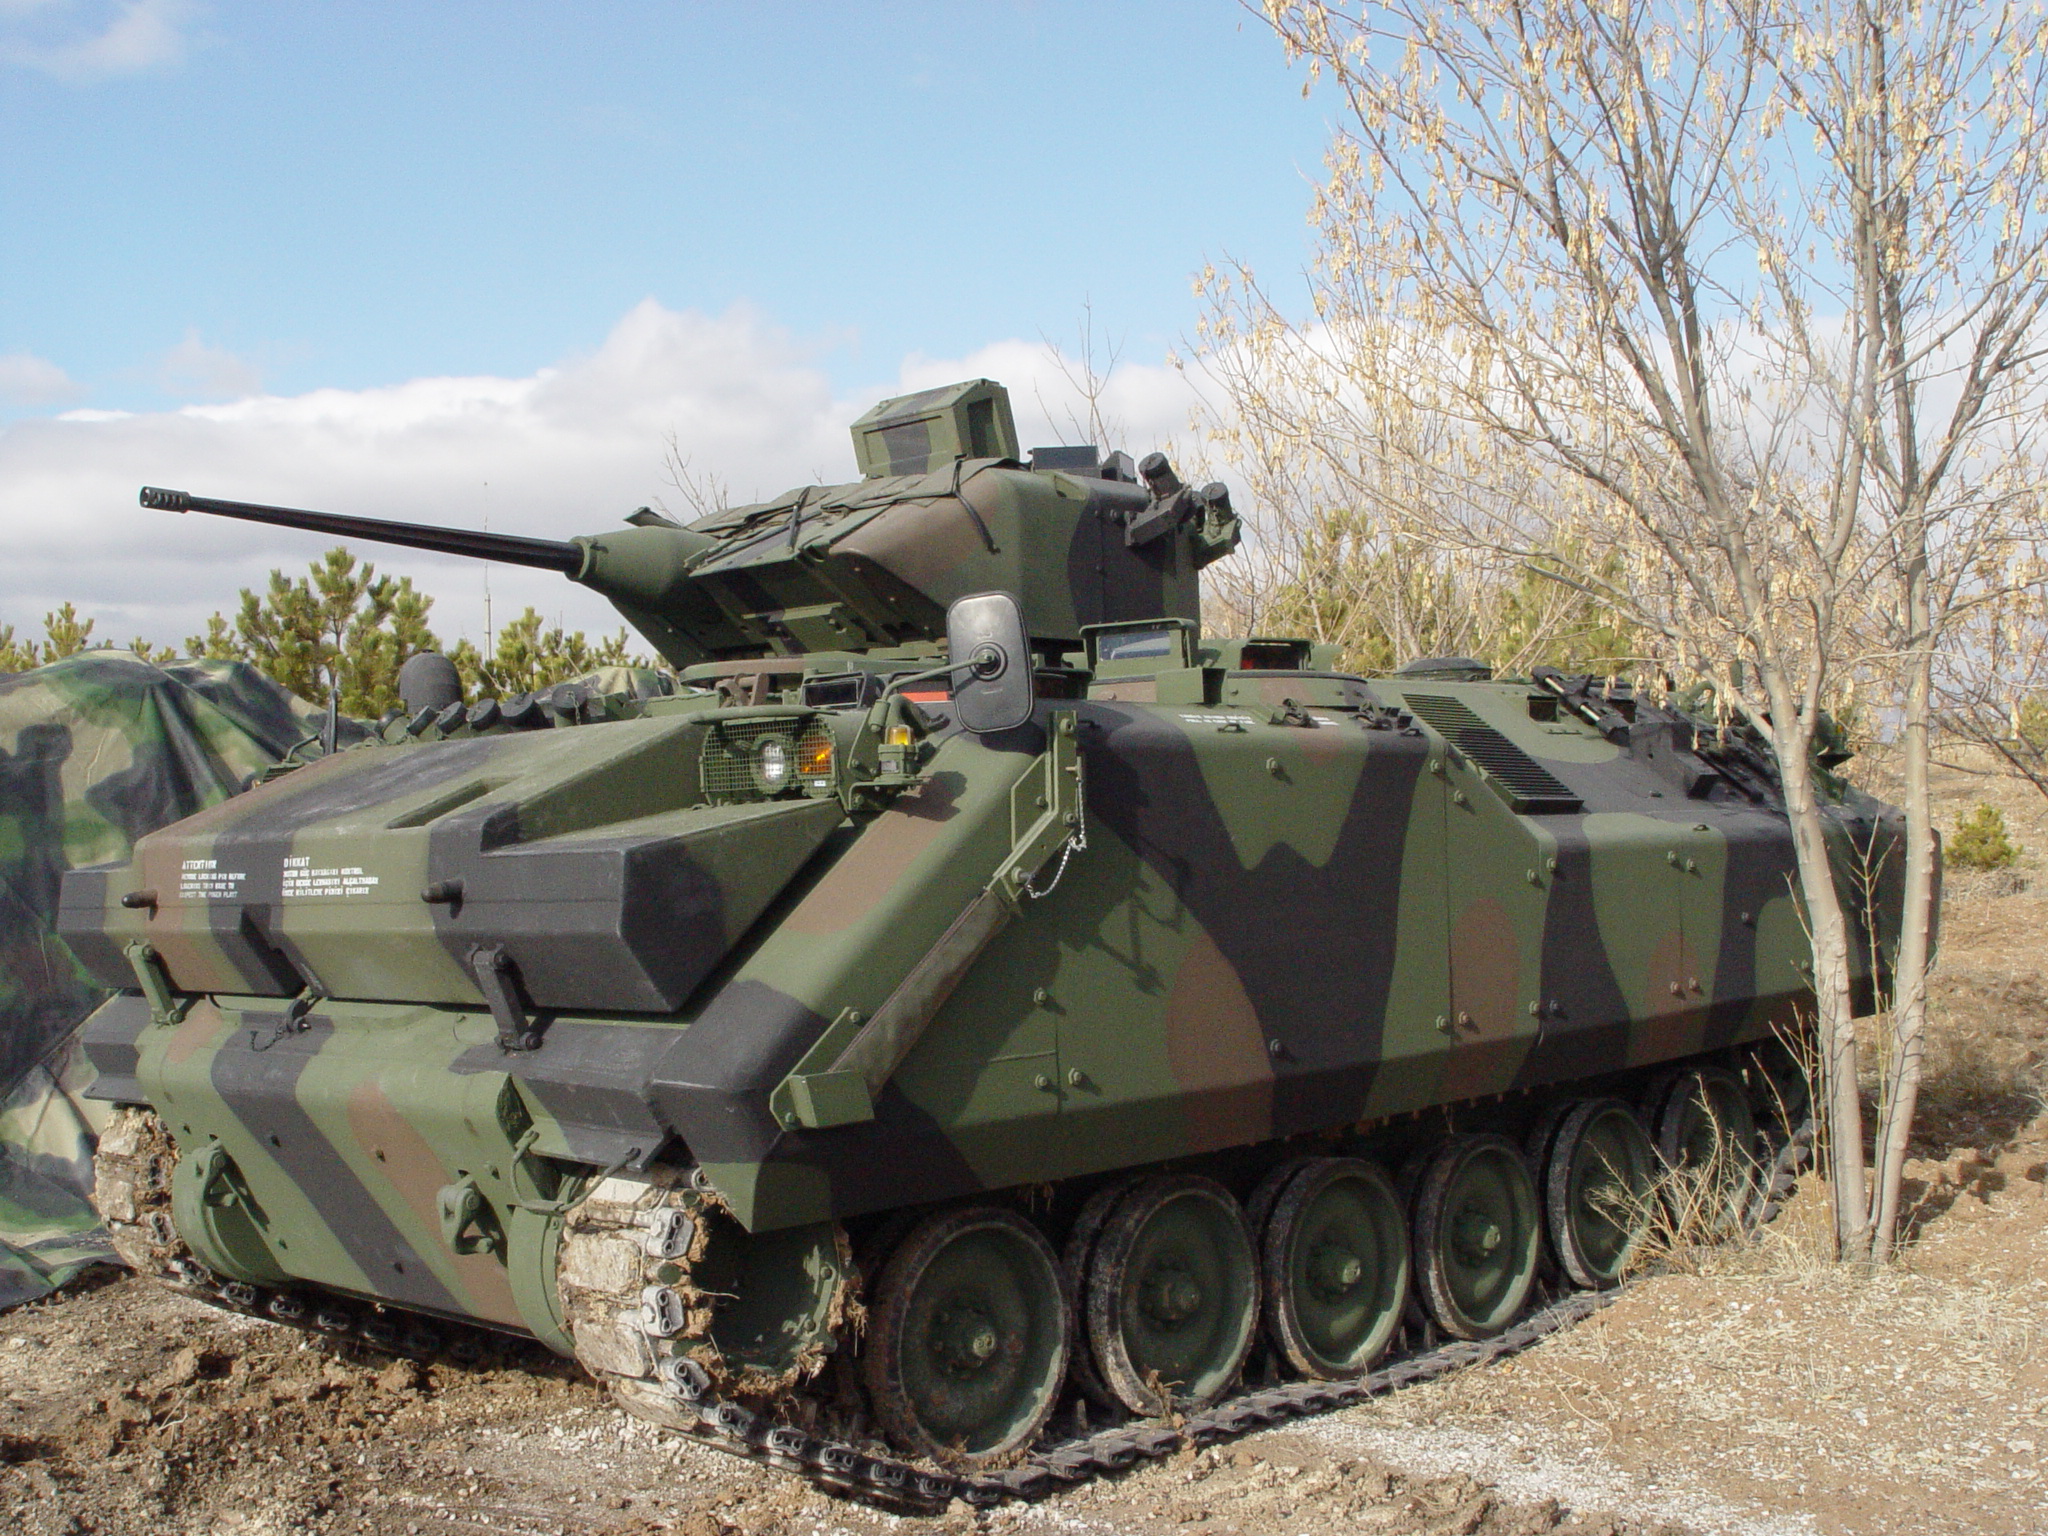 FNSS - ACV-19 ARMOURED COMBAT VEHICLE